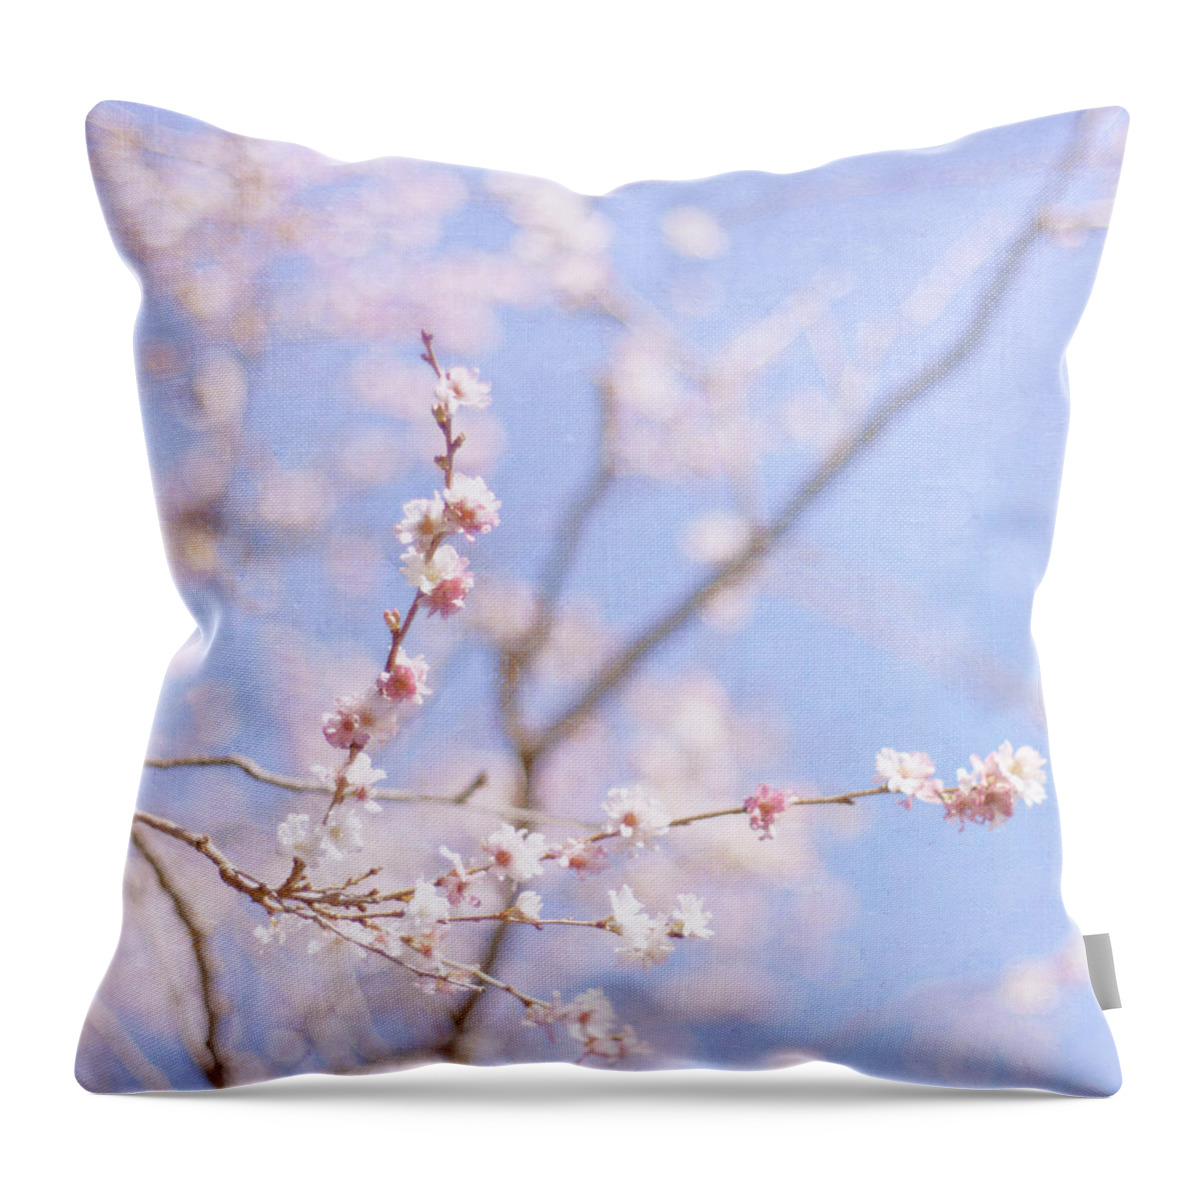 Otago Region Throw Pillow featuring the photograph Winter Blossom by Jill Ferry